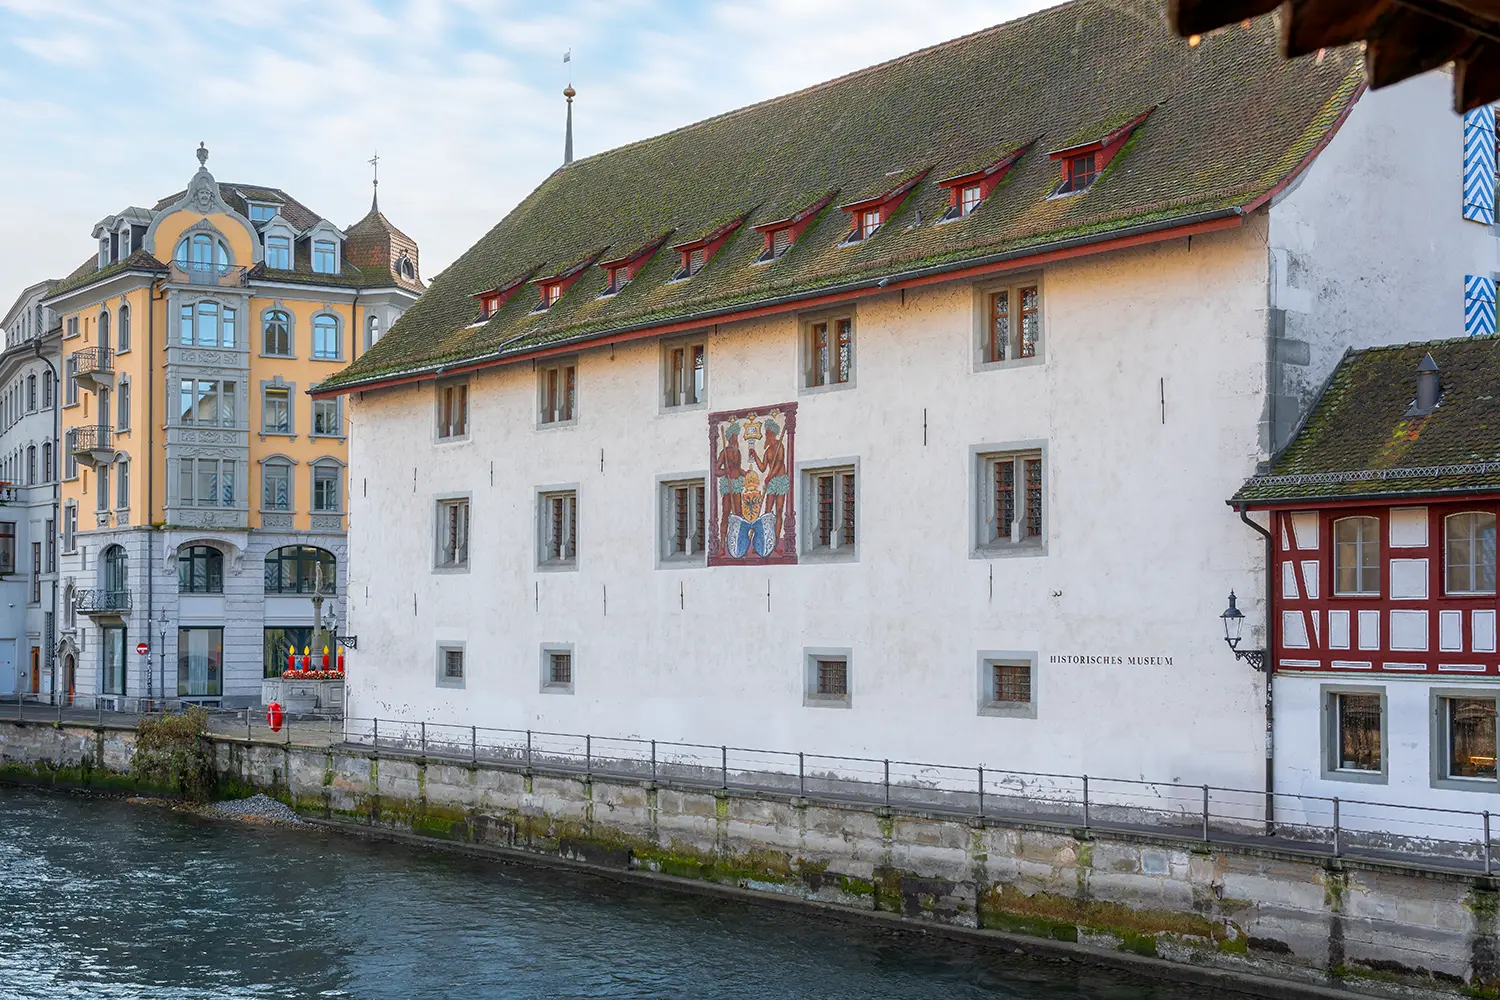 Museum of History and River Reuss - Lucerne, Switzerland